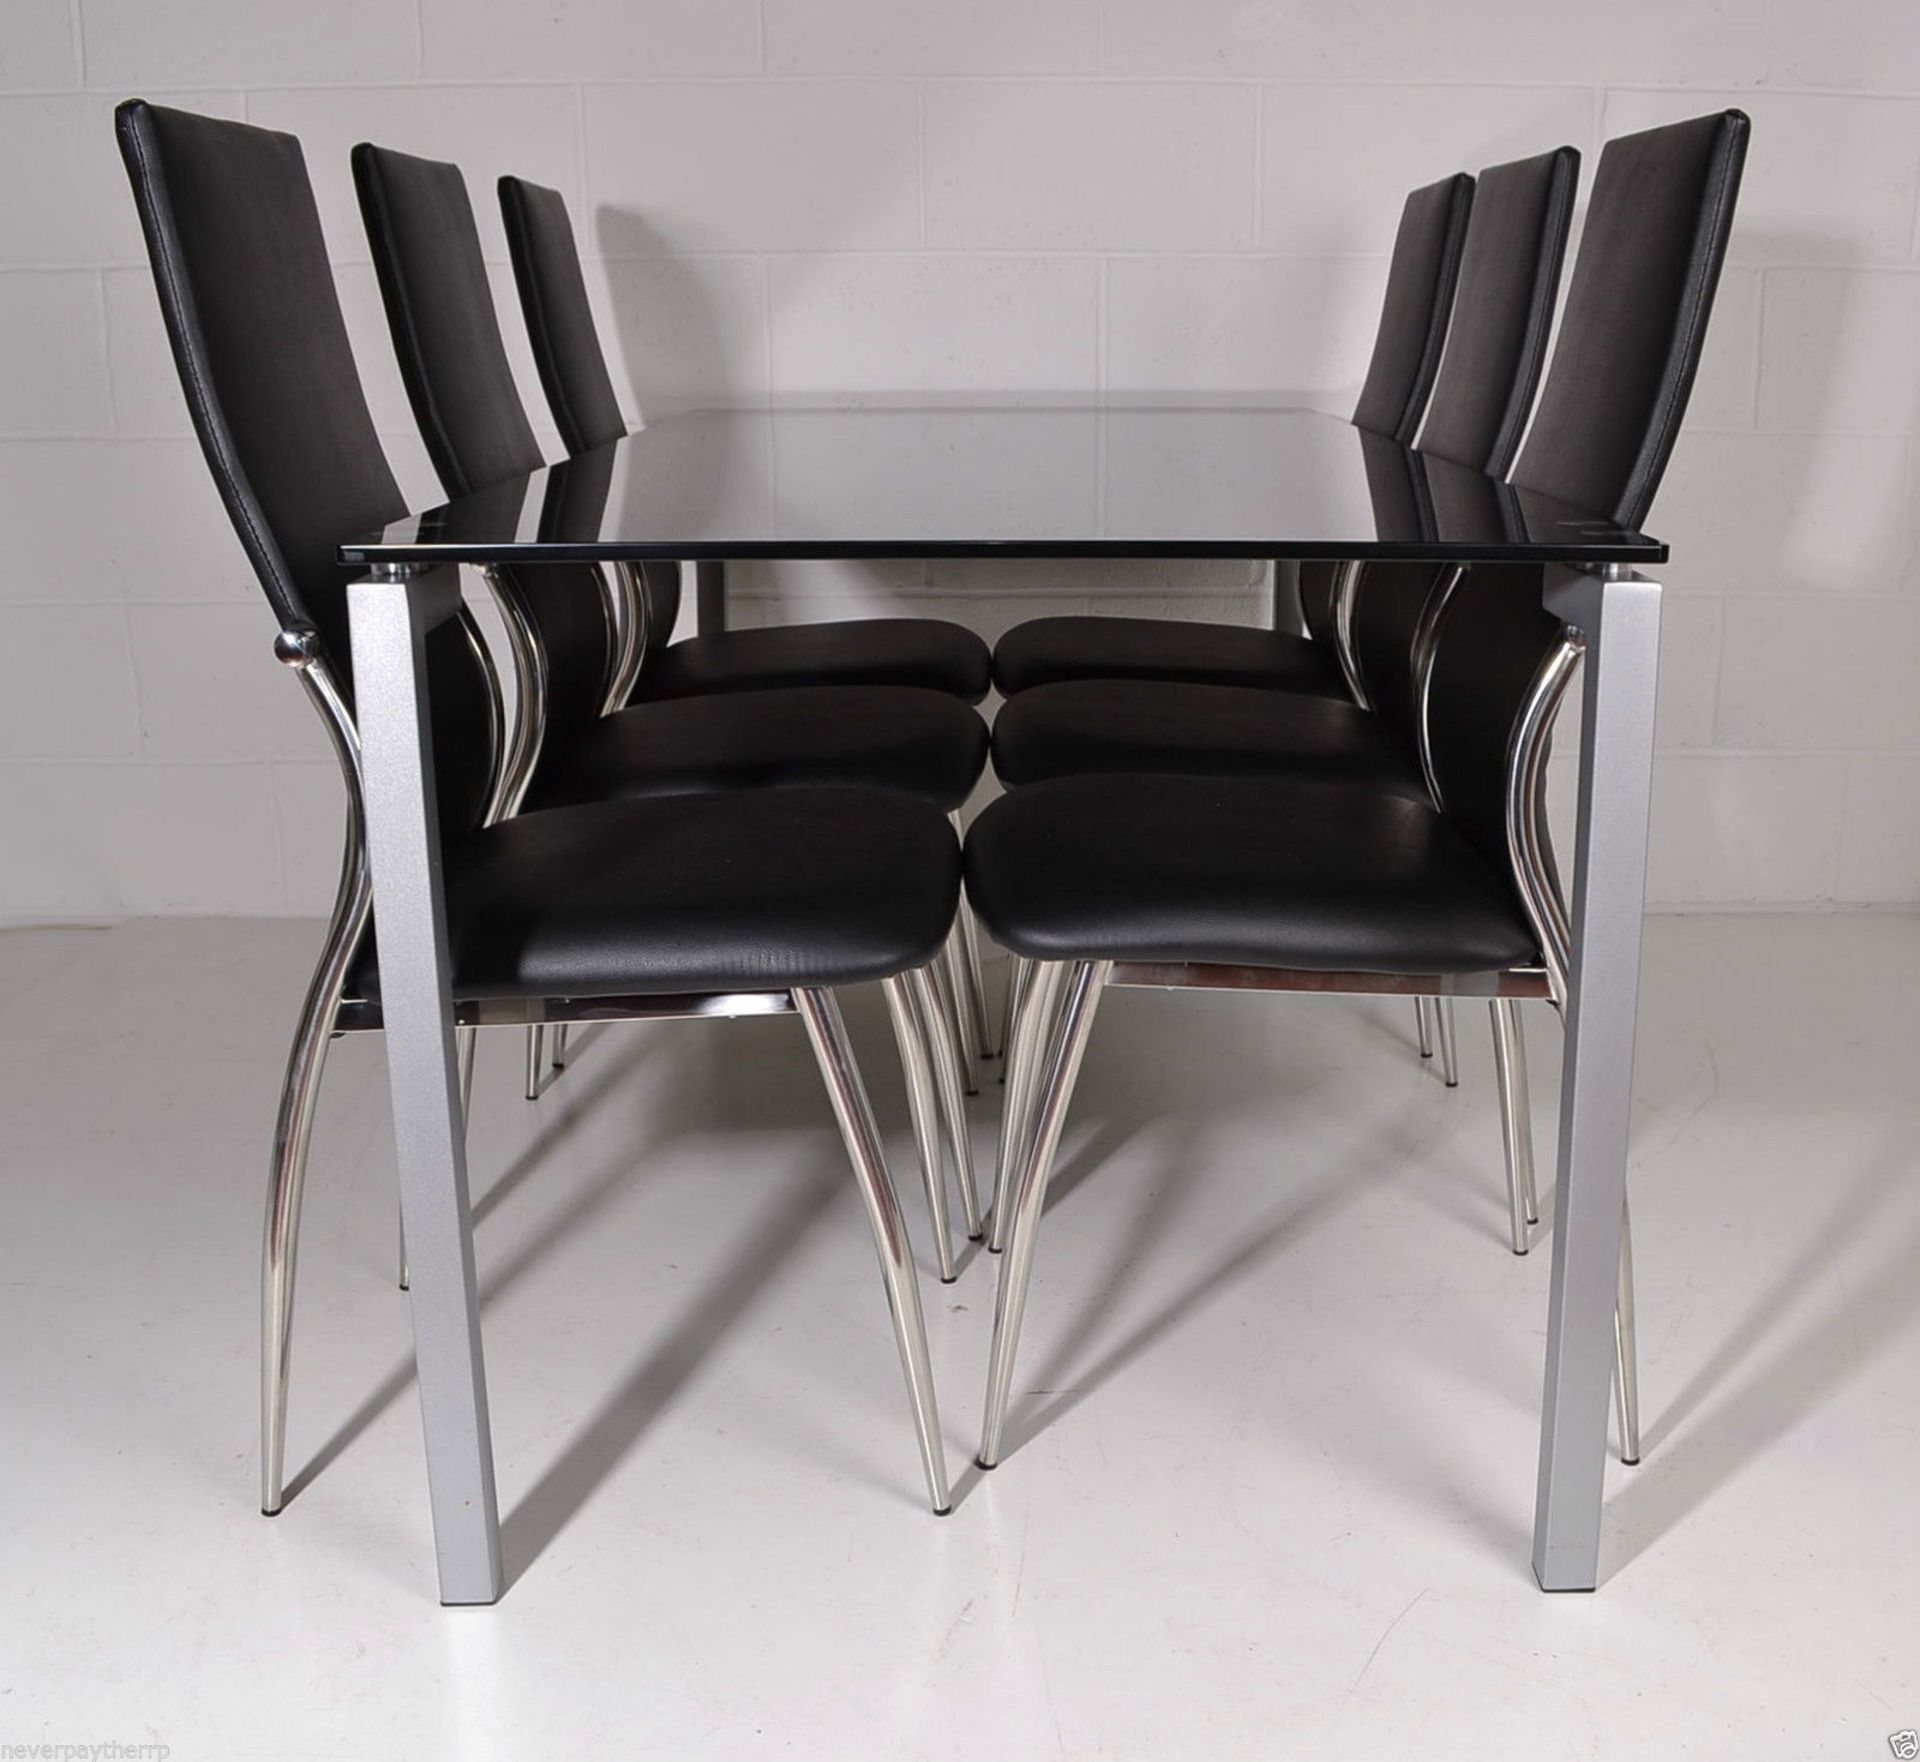 NEW Birlea Black Glass & Chrome Dining Table Set with 4 (not 6) Black Chairs. New set. Glass top - Image 3 of 9